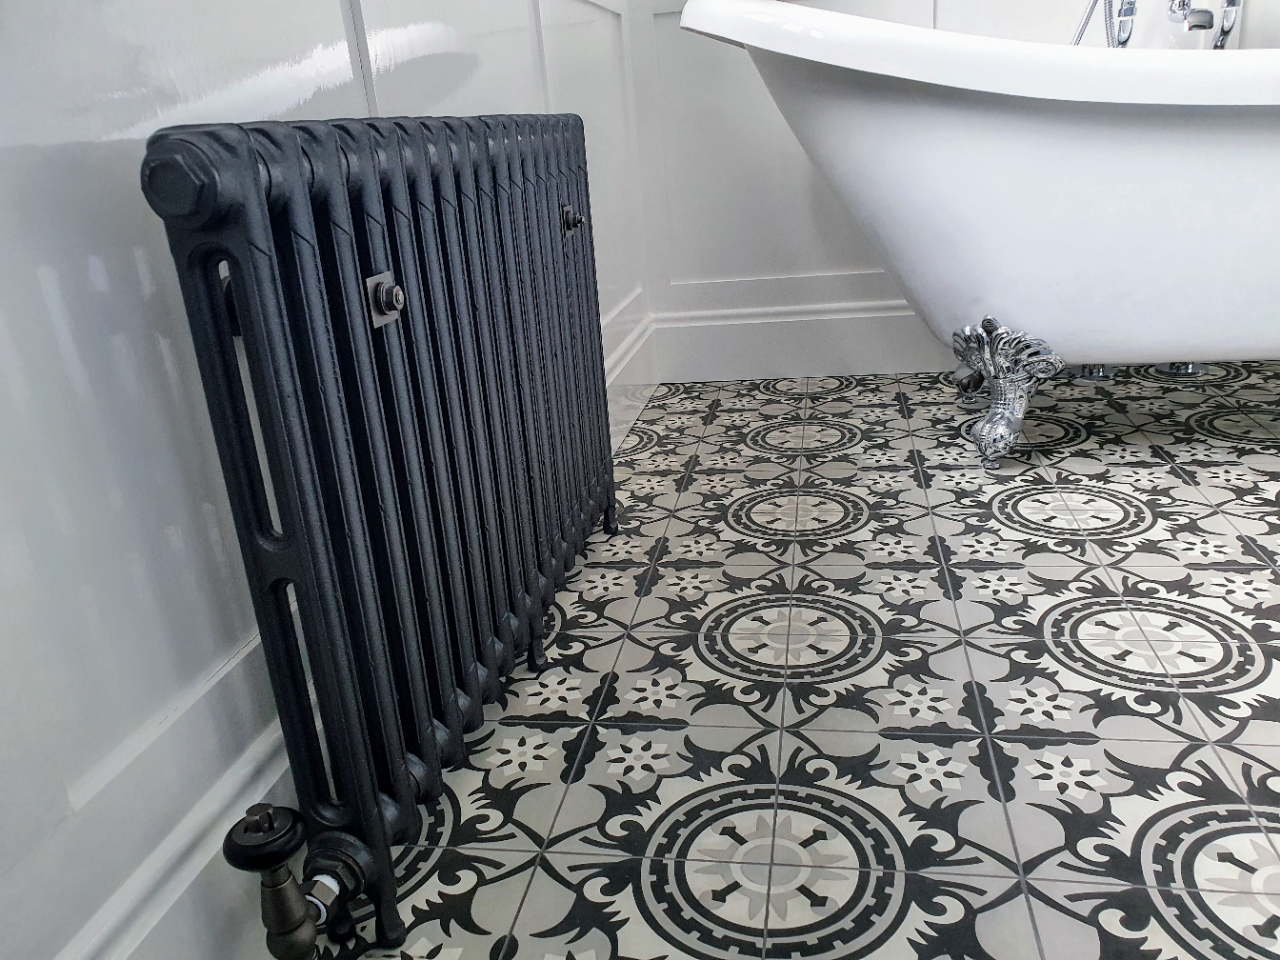 Victorian 2 Column Cast Iron Radiator Fitted In A Bathroom